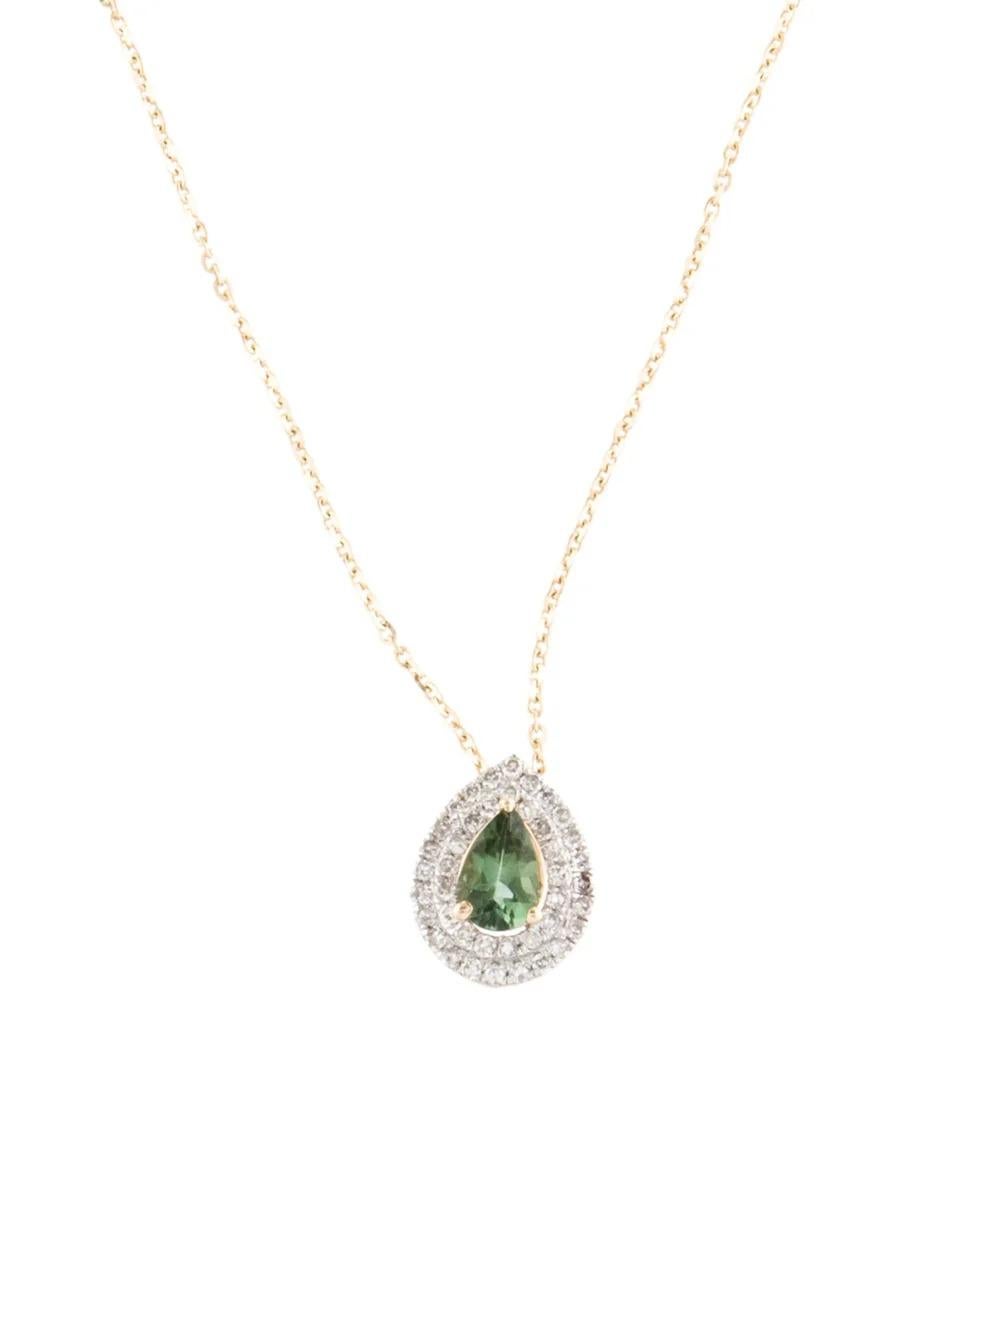 Elevate your style with this exquisite 14K Yellow Gold Pendant Necklace, featuring a stunning 0.36 Carat Pear Brilliant Tourmaline and 0.22 Carats of sparkling Diamonds. This timeless piece exudes elegance and sophistication, perfect for any